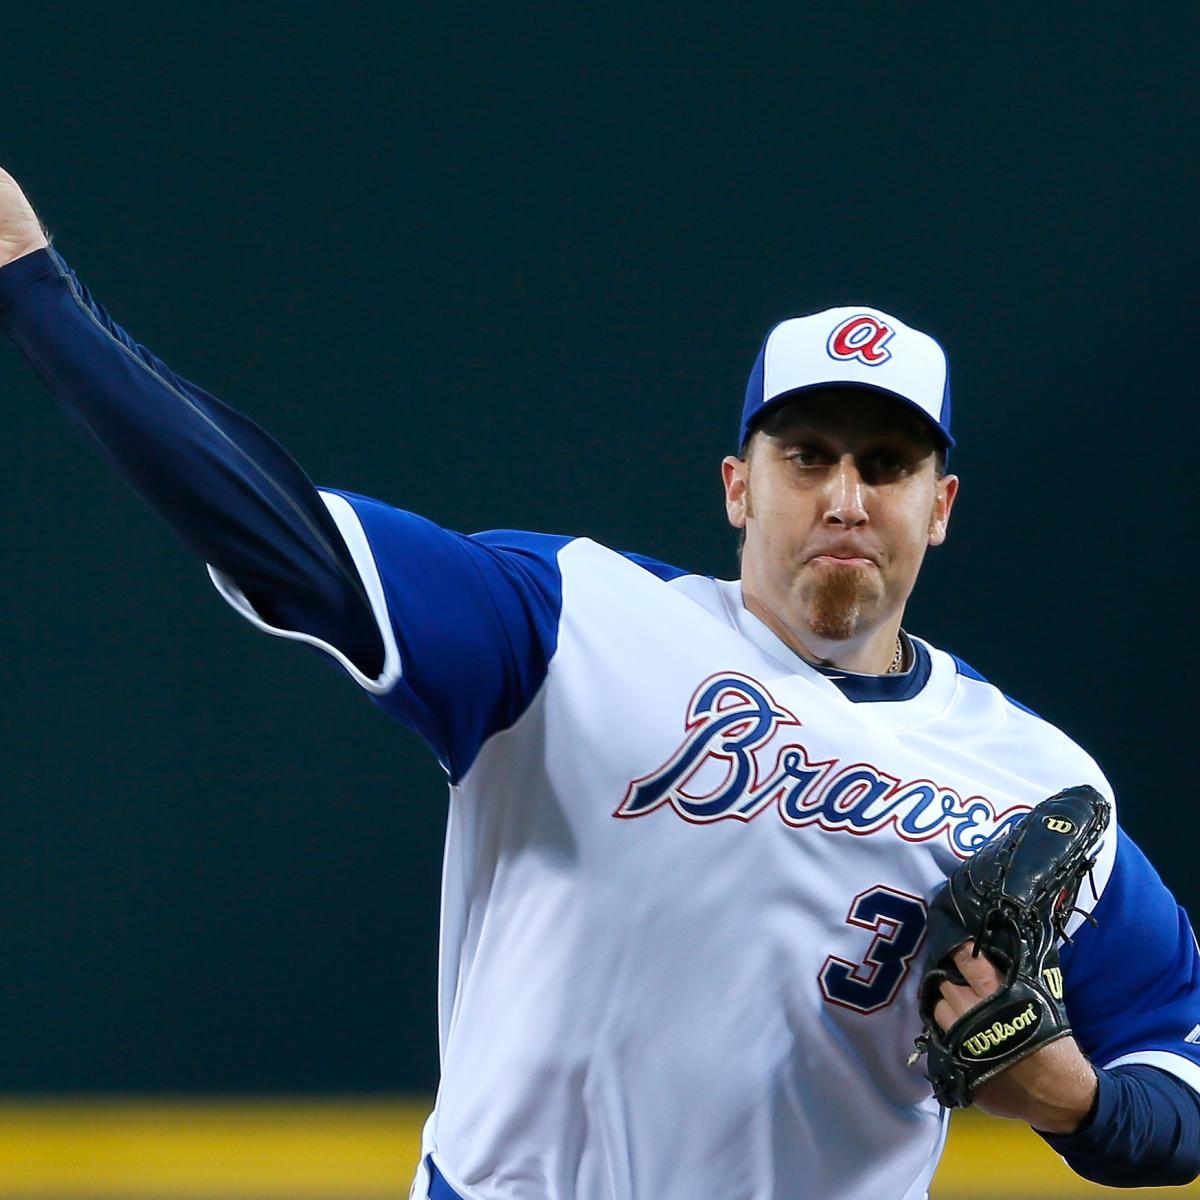 What Has Gotten into Braves' Surprising Star Aaron Harang in 2014